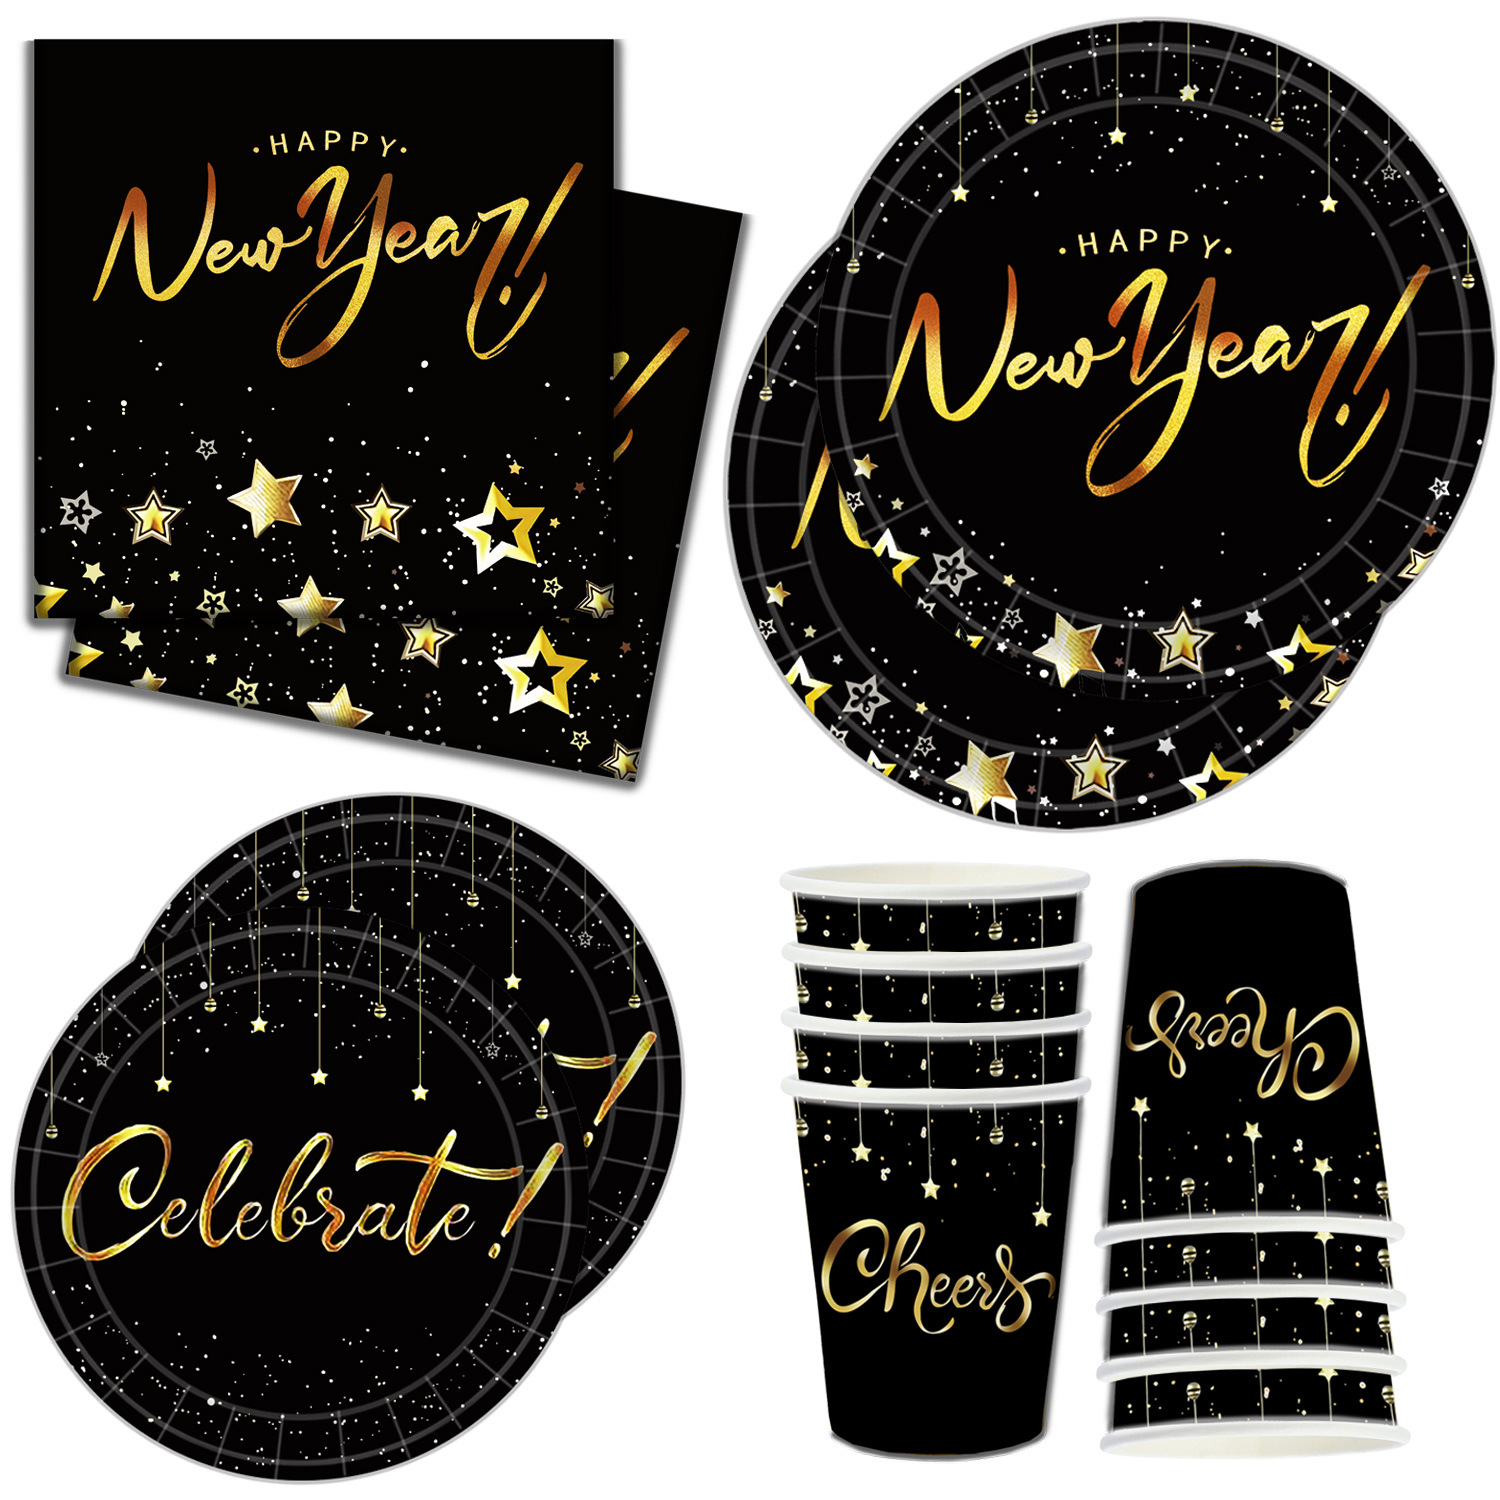 New Year Christmas New Year's Eve Party Paper Plate Tissue Paper Cup Disposable Tableware Black Gold Christmas Party